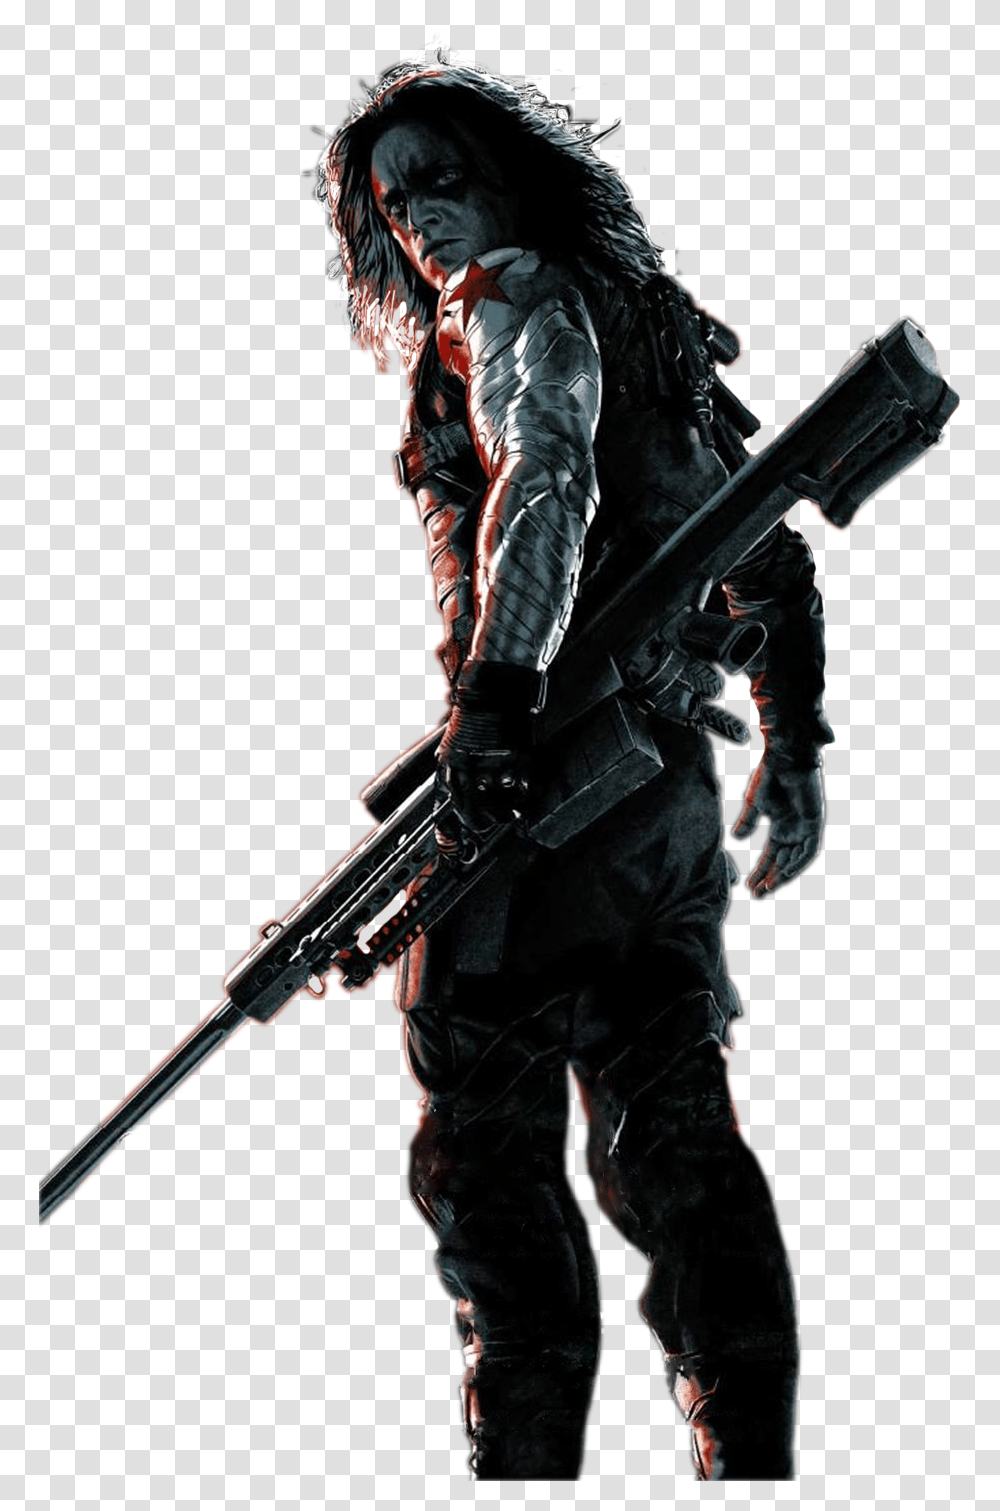 Were Edited In Adobe Photoshop Using The Two Single Captain America The Winter Soldier, Person, Human, Weapon, Weaponry Transparent Png